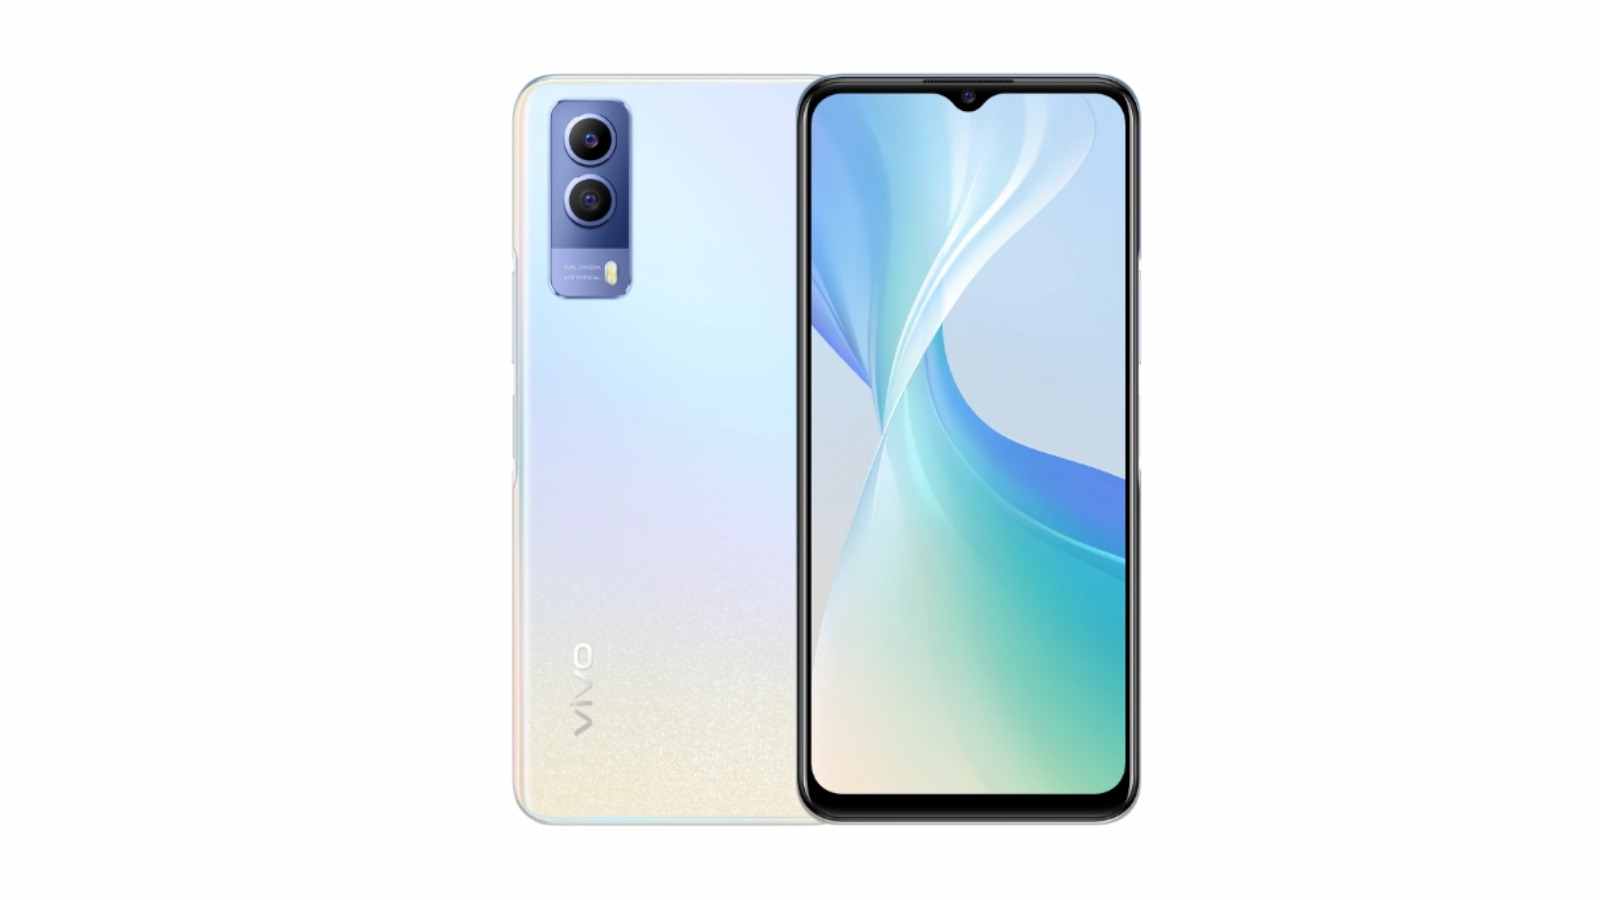 Vivo T1x 5G with MediaTek Dimensity 900, 64MP dual rear camera launched: Price, Specifications